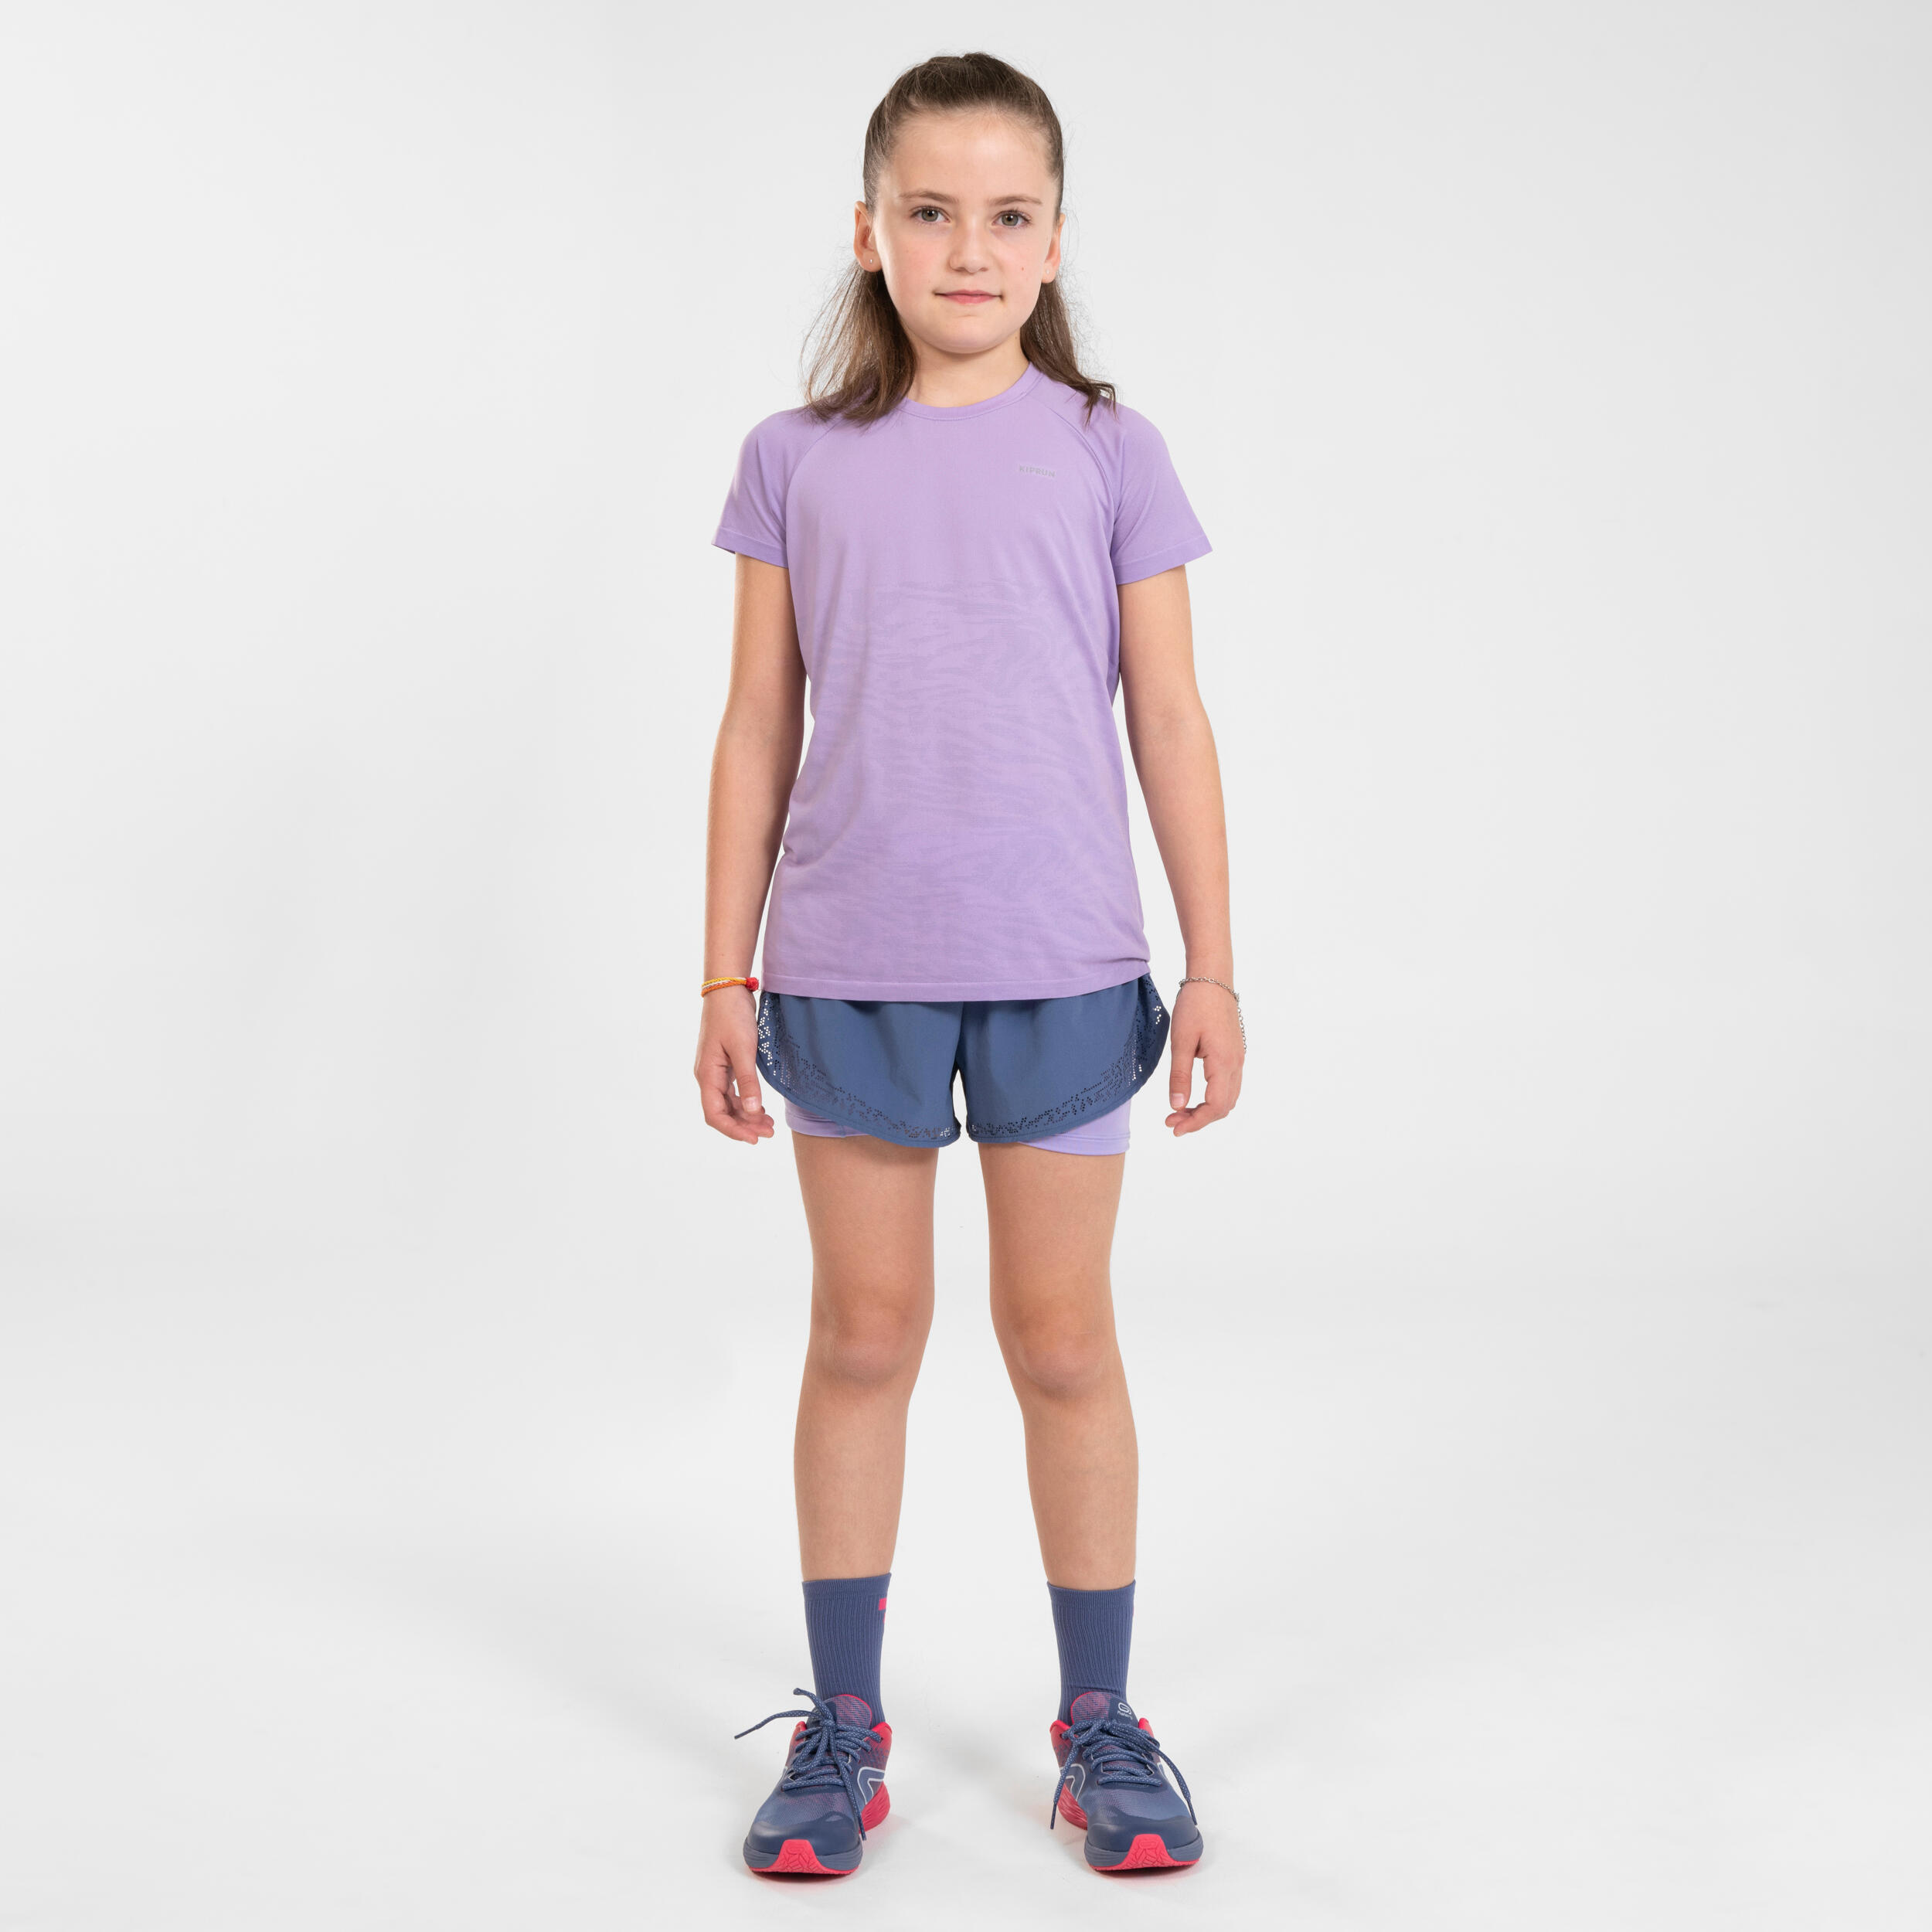 KIPRUN DRY+ girl's breathable 2-in-1 tight running shorts - denim and mauve 2/14